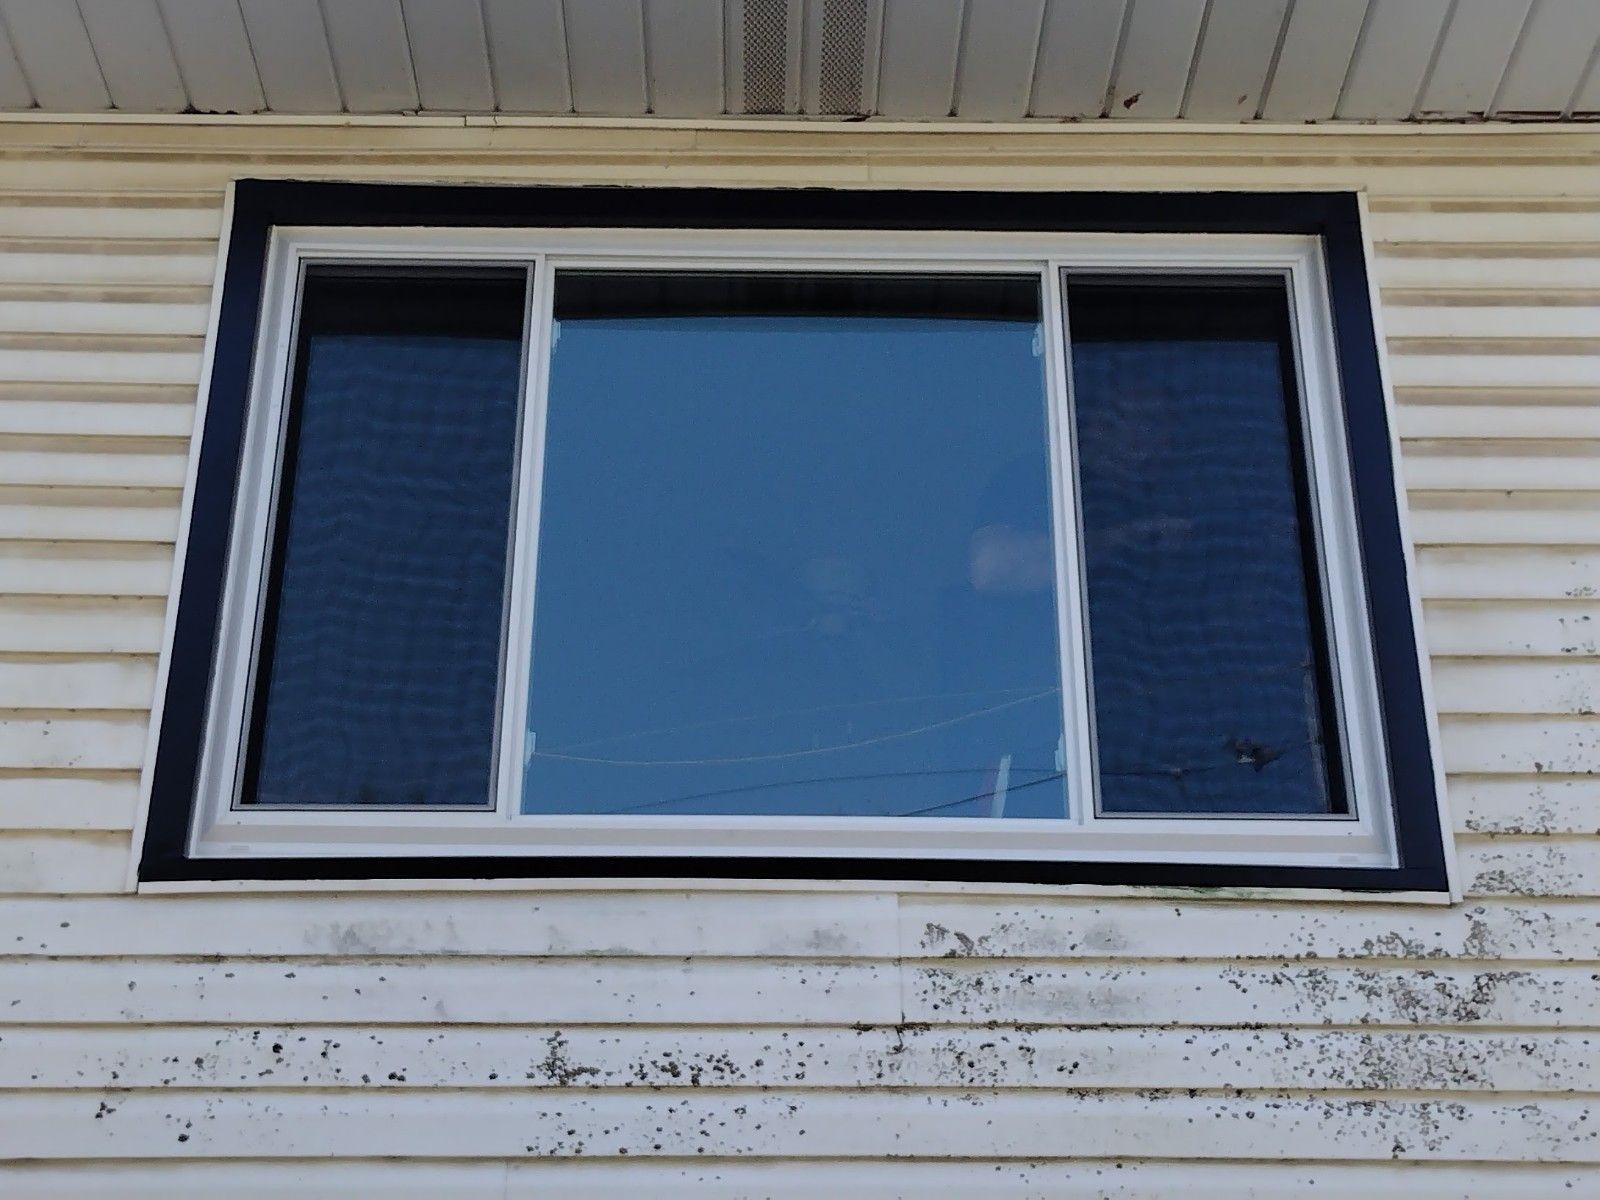 A large window on the side of a house